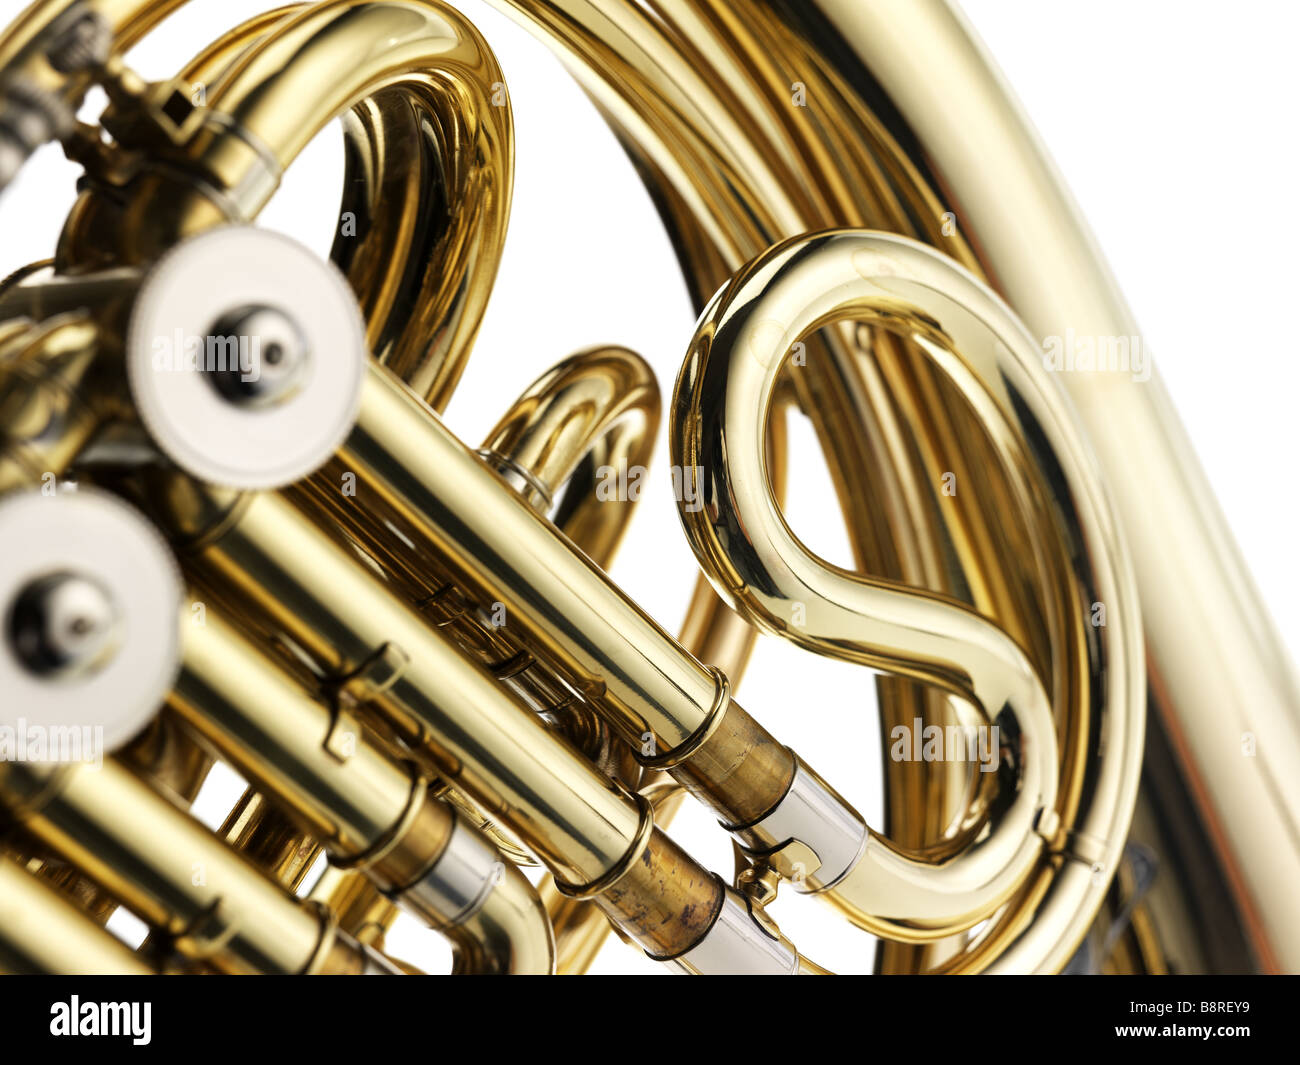 French Horn, Trumpet, Trombone, Music, Still Life, Instruments, Orchestra, Classic Stock Photo